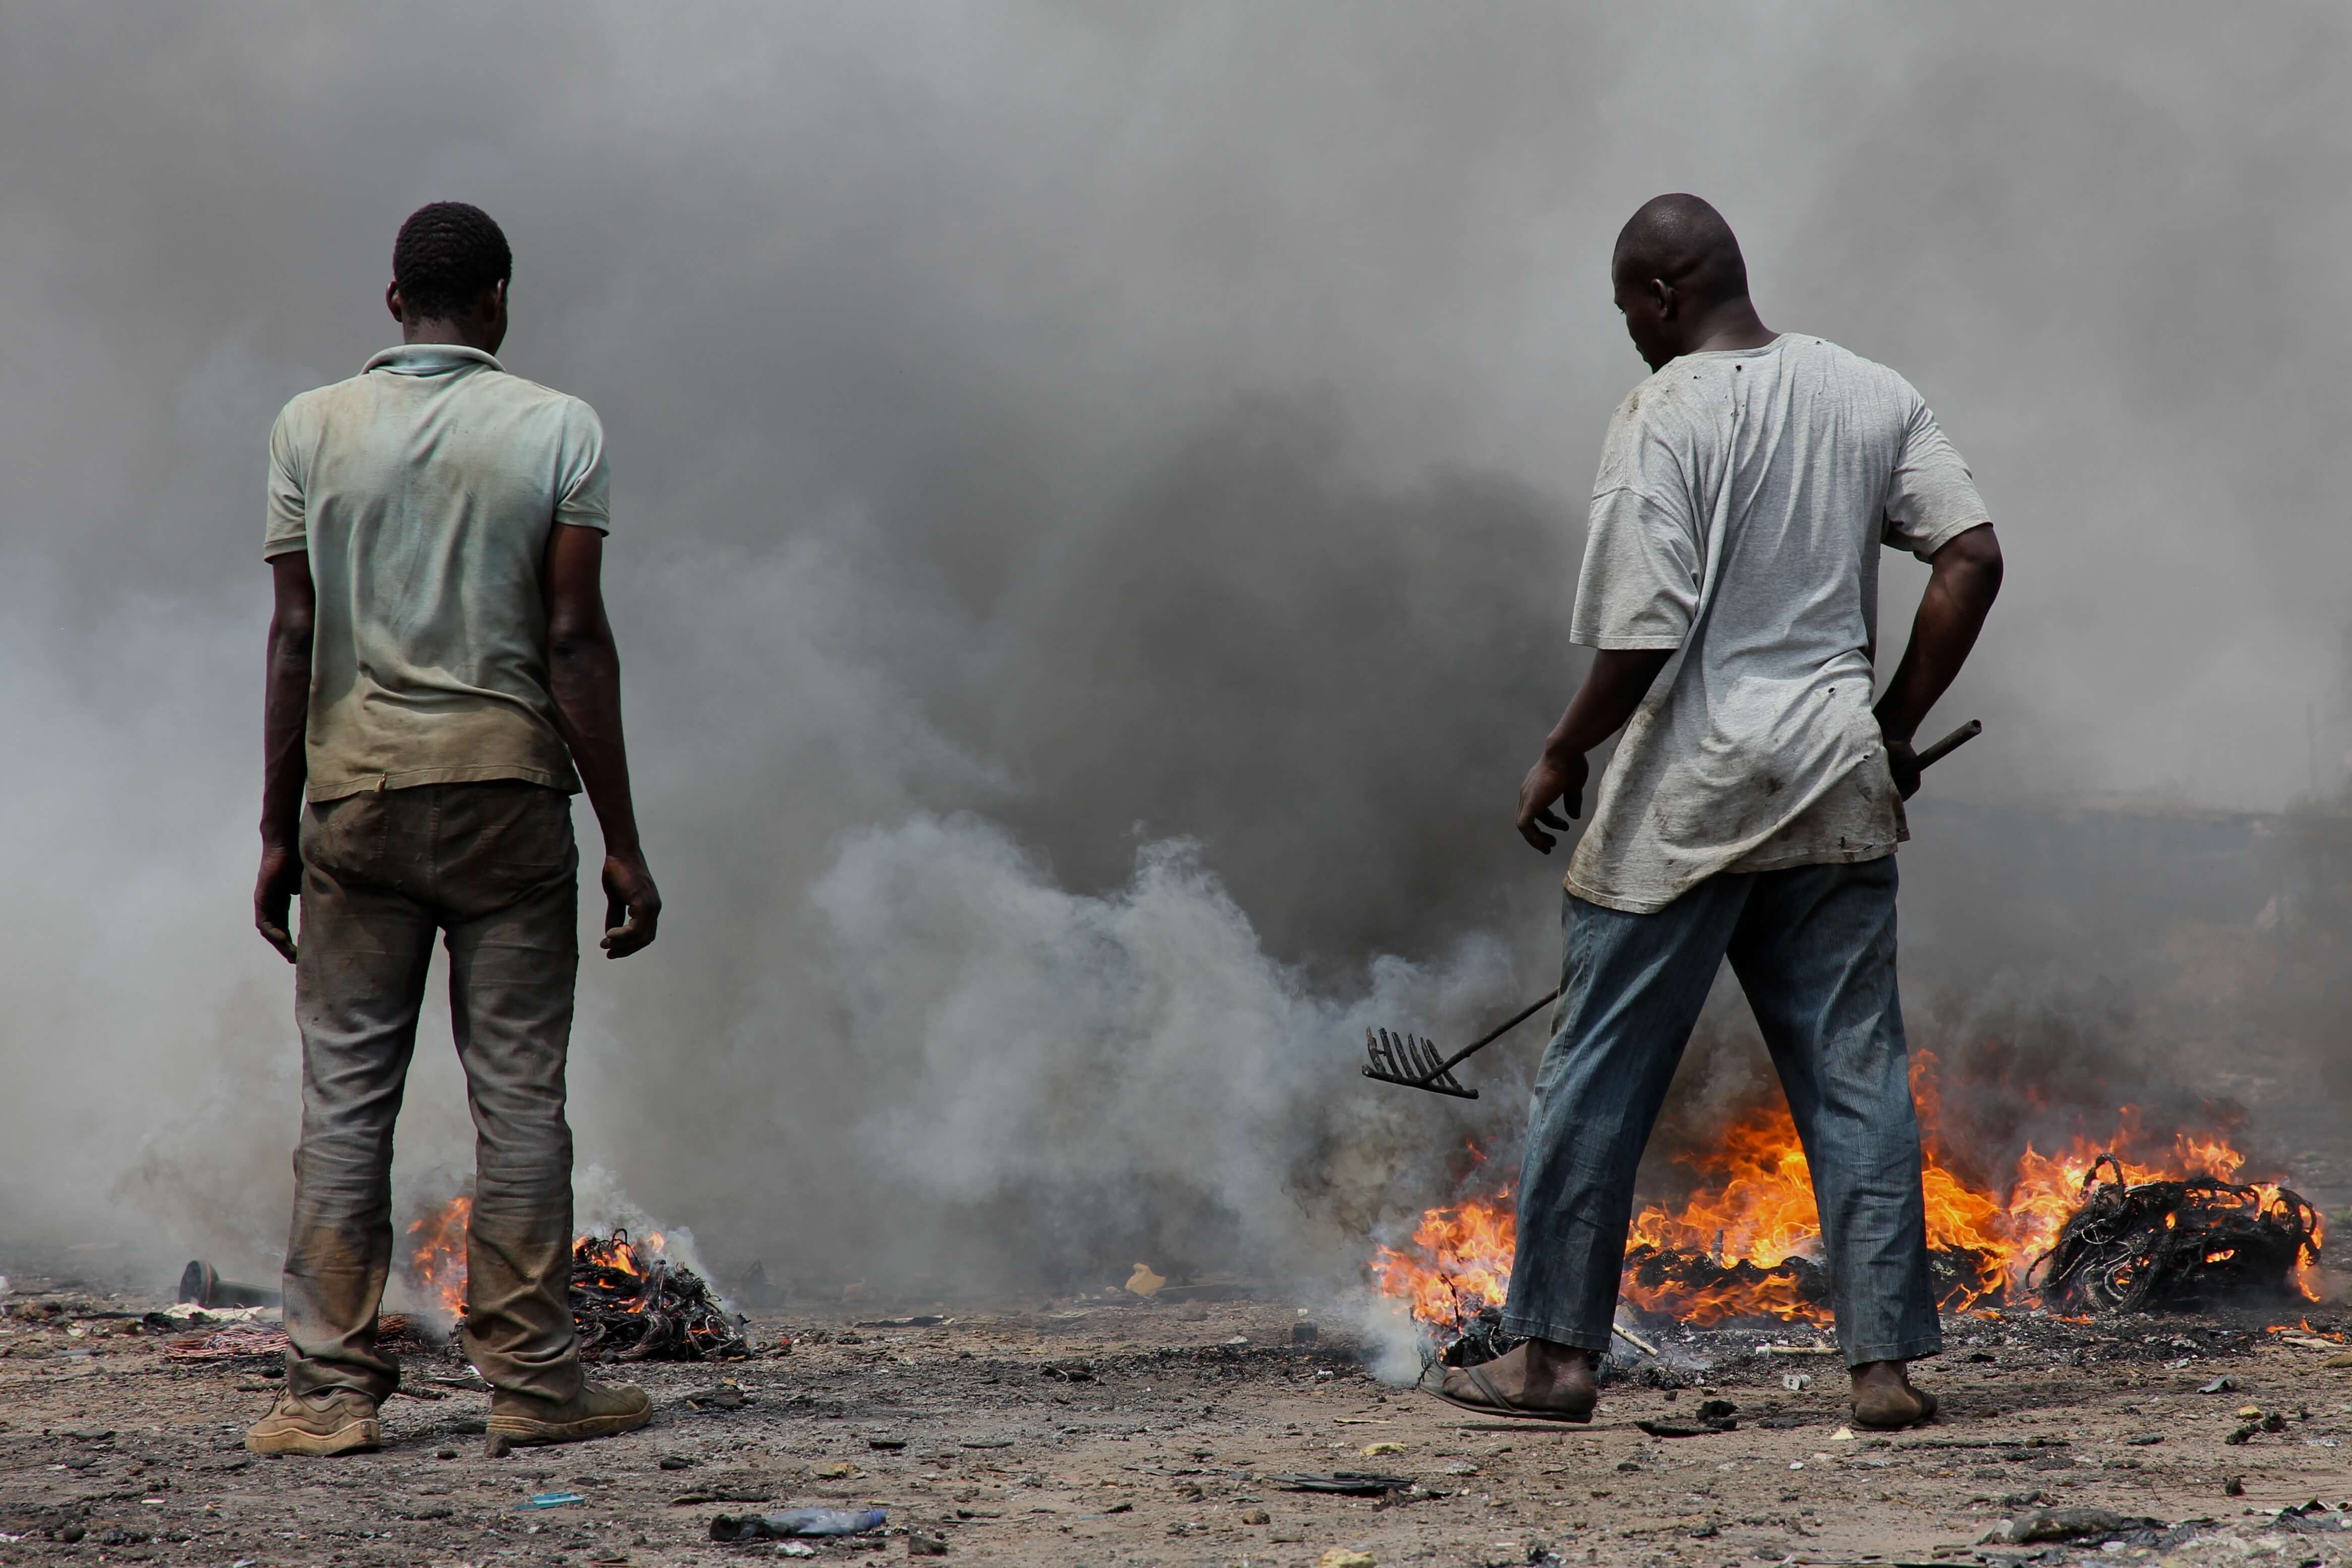 E-waste – The Hazards of Electronic Waste in Africa